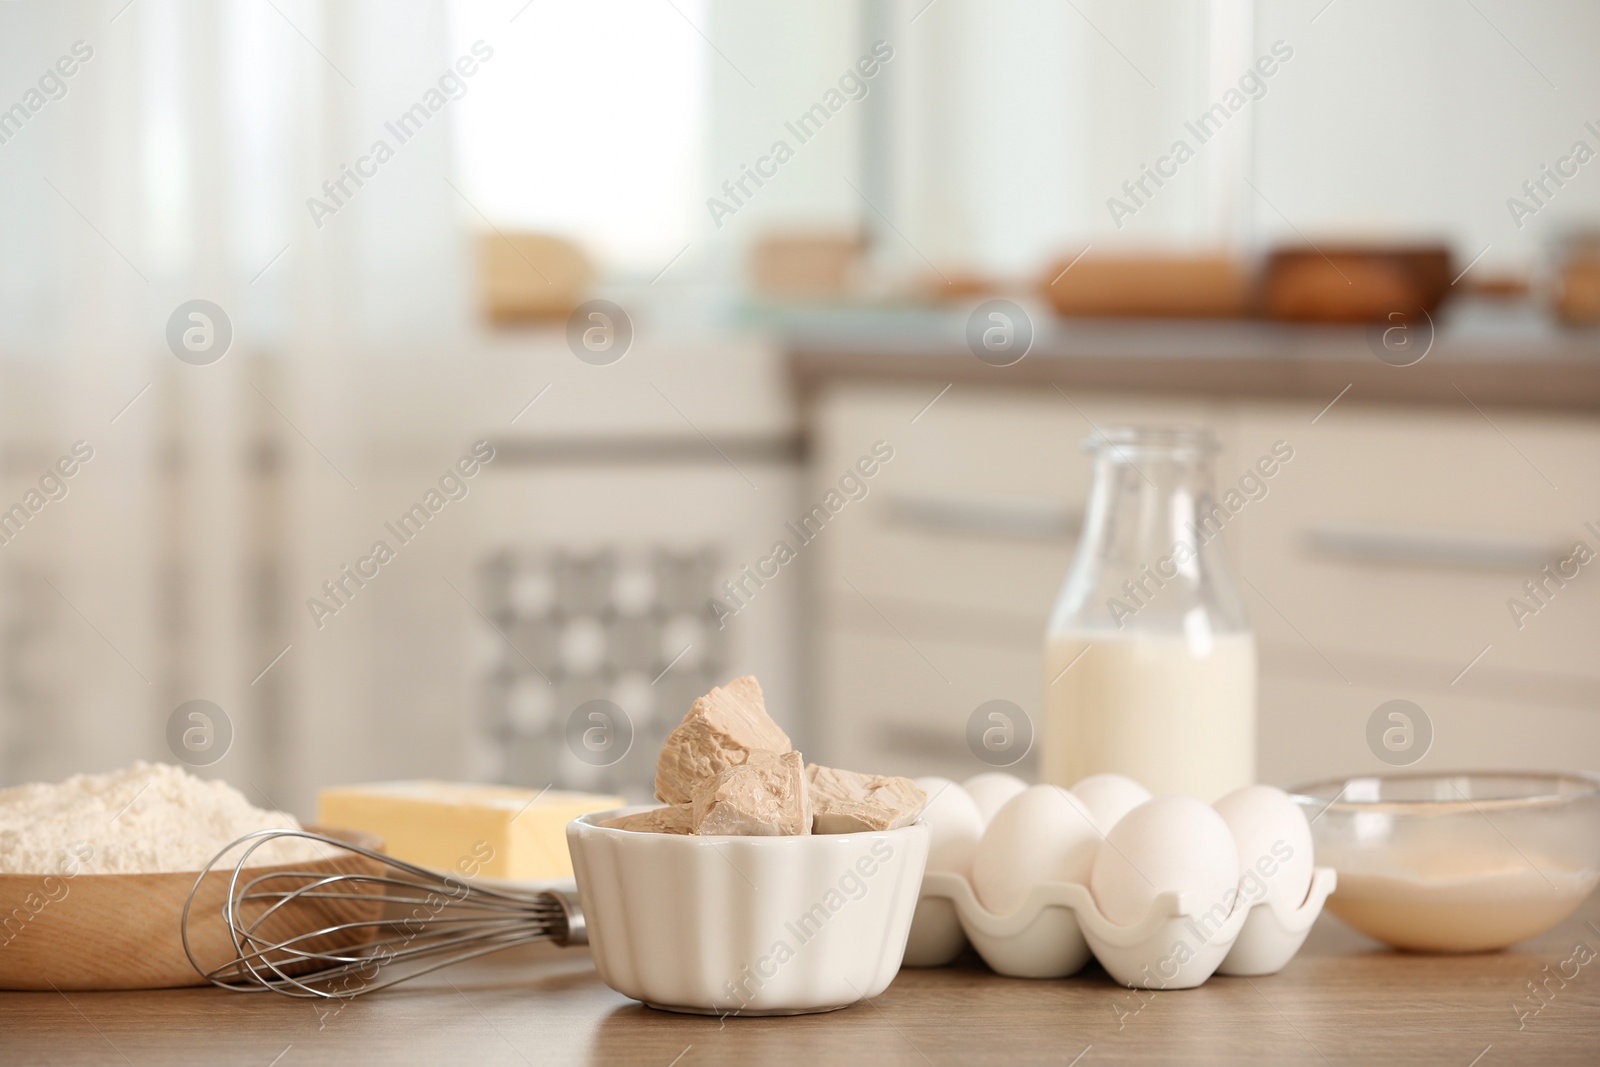 Photo of Pieces of compressed yeast and dough ingredients on wooden table indoors, space for text